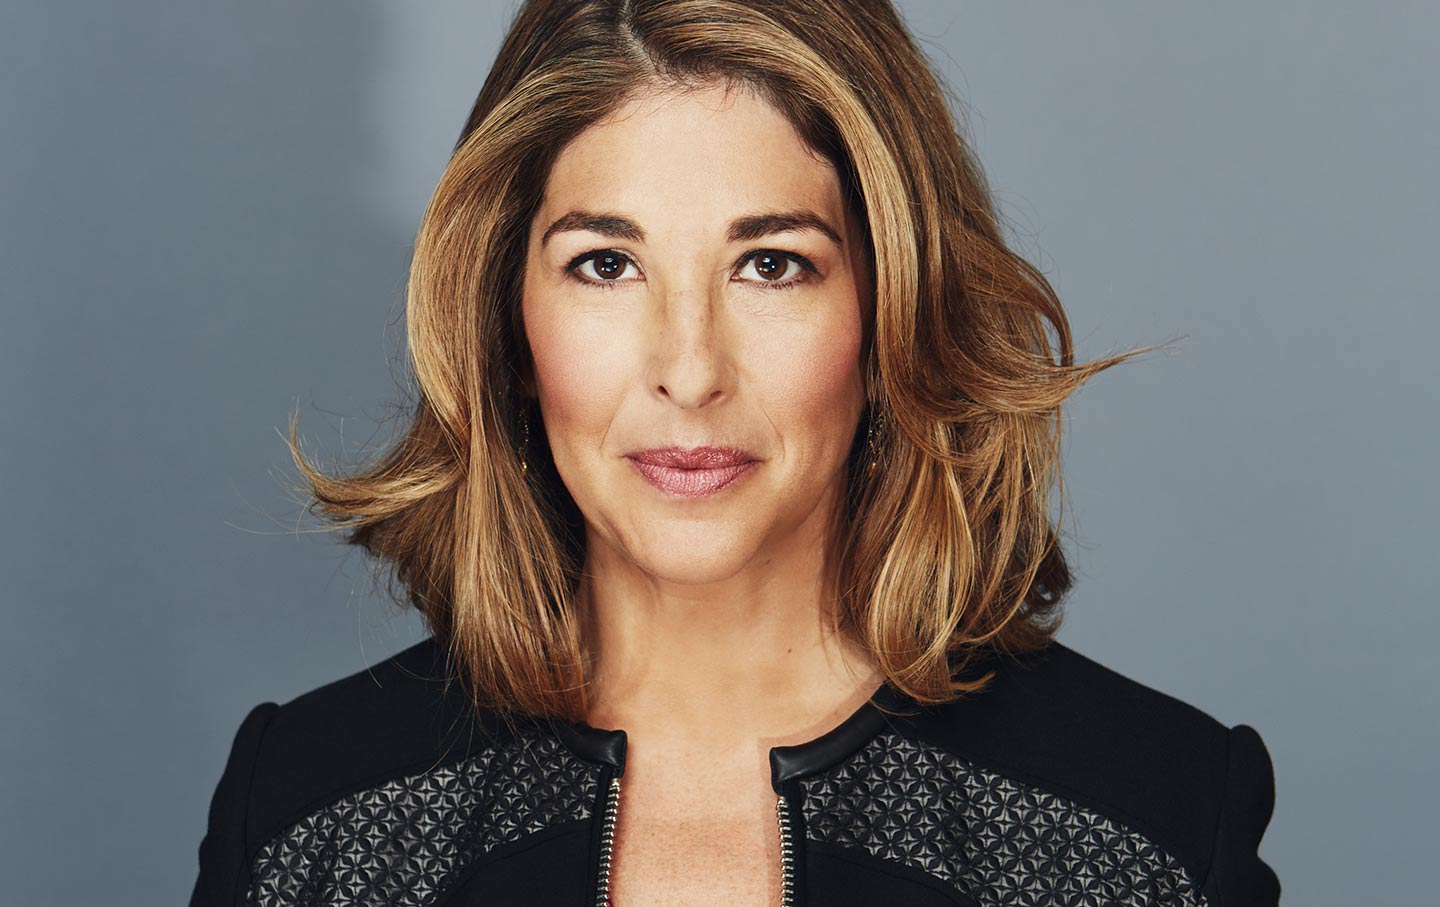 Naomi Klein: ‘We Are Seeing the Beginnings of the Era of Climate Barbarism’